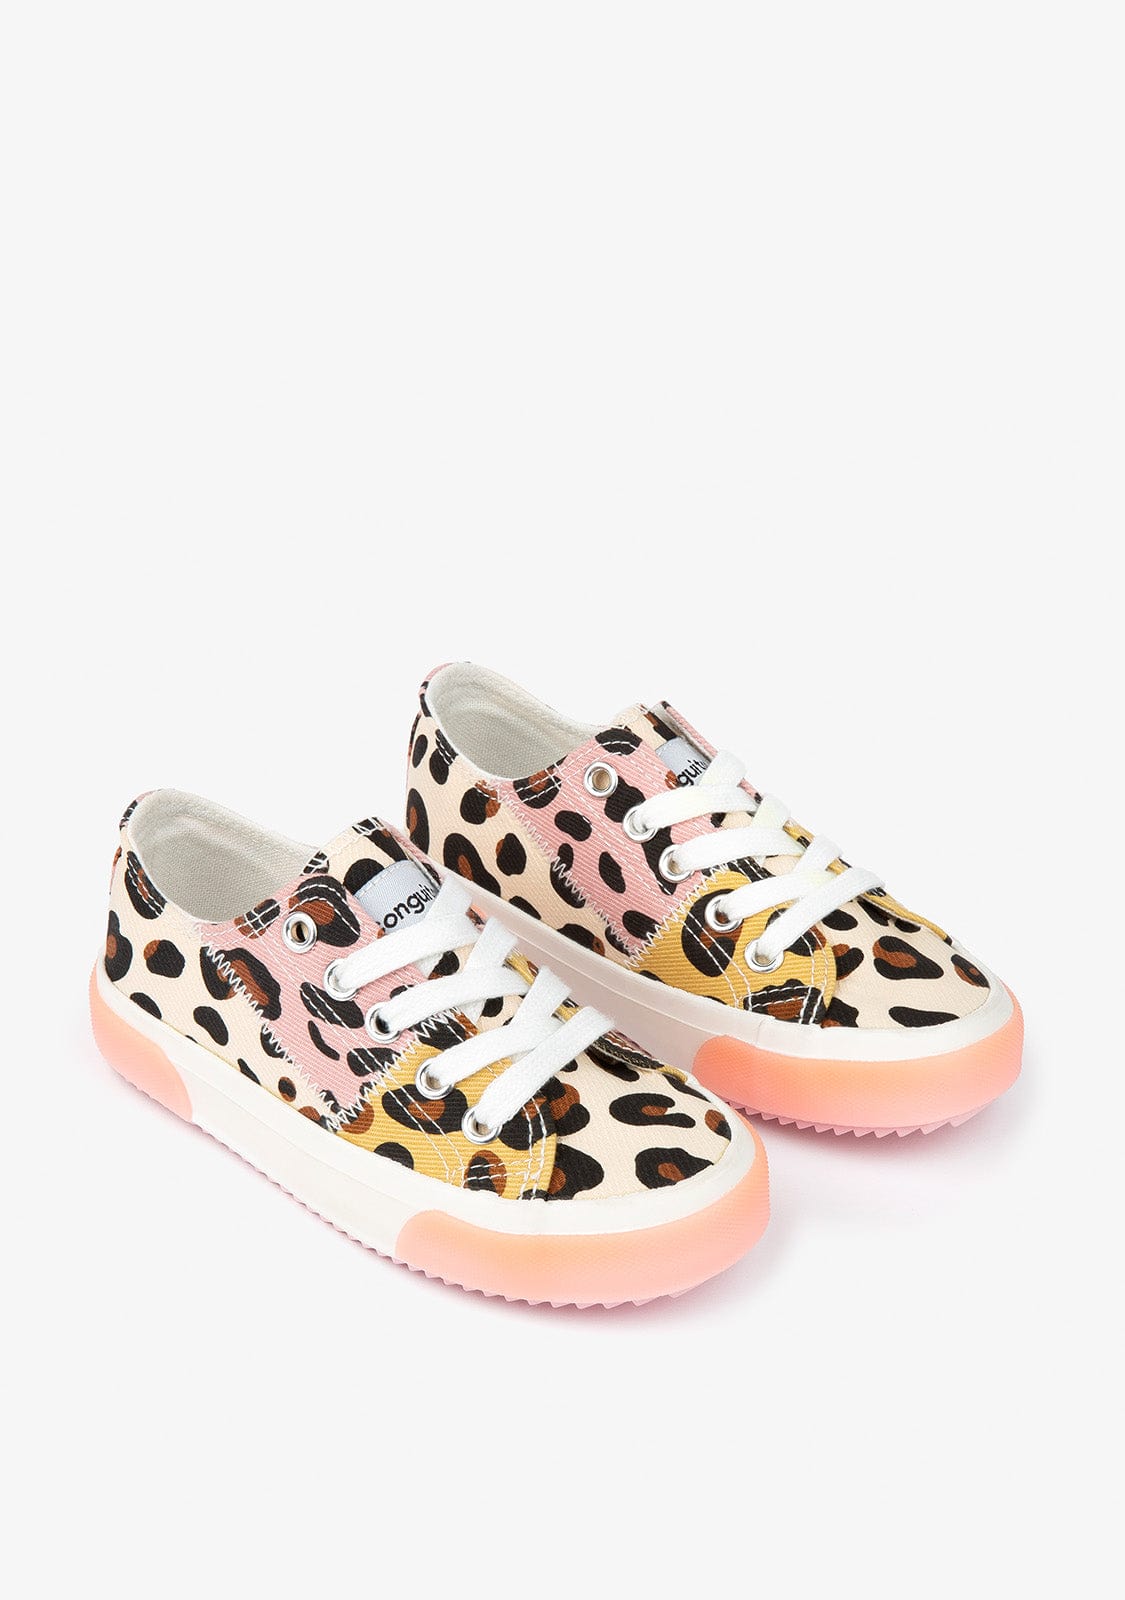 CONGUITOS Shoes Girl's Leo Print Sneakers